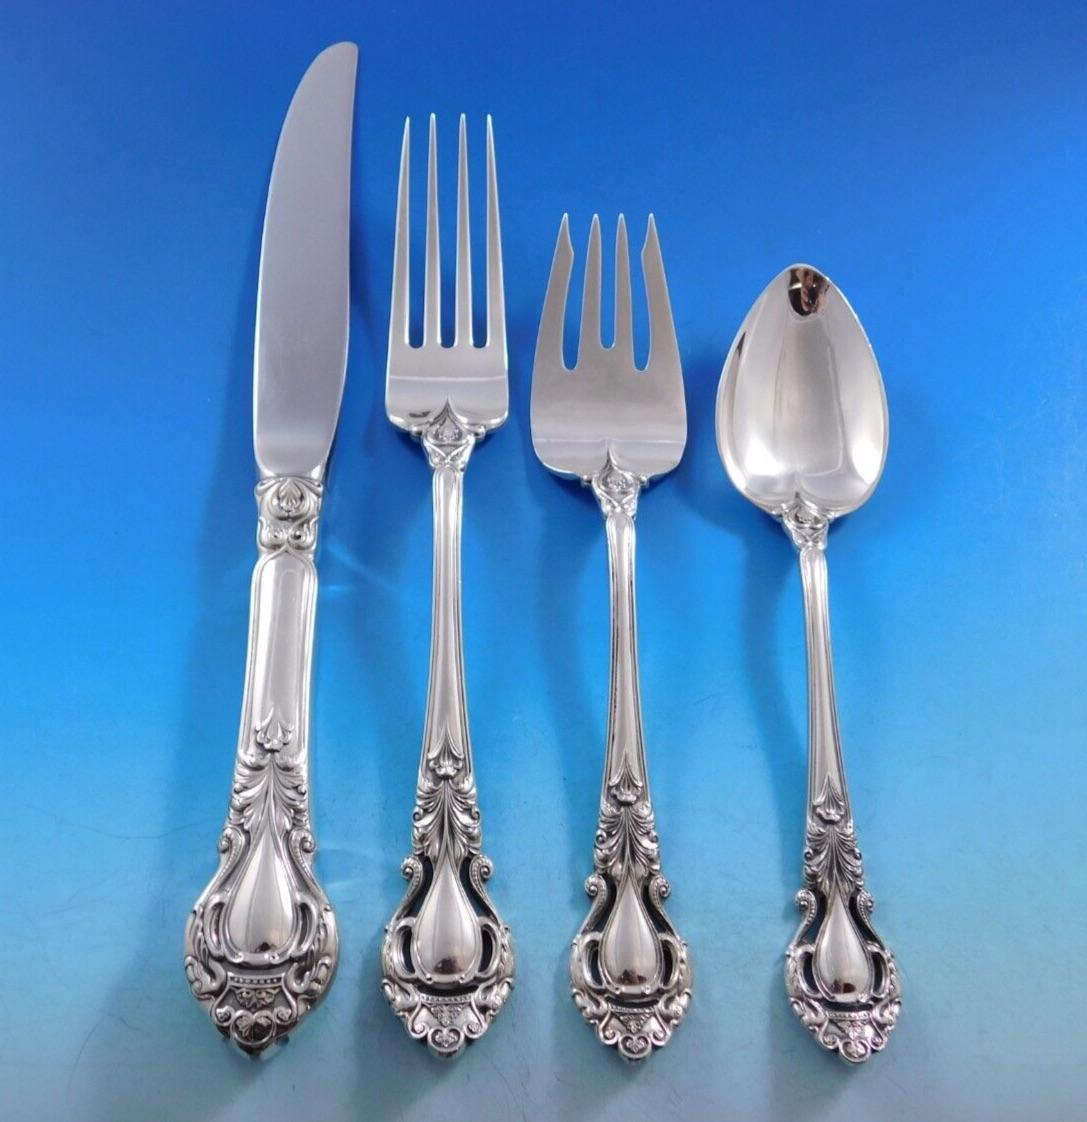 Argent sterling Royal Dynasty by Stieff Sterling Silver Flatware Set for 12 Service 60 pieces en vente